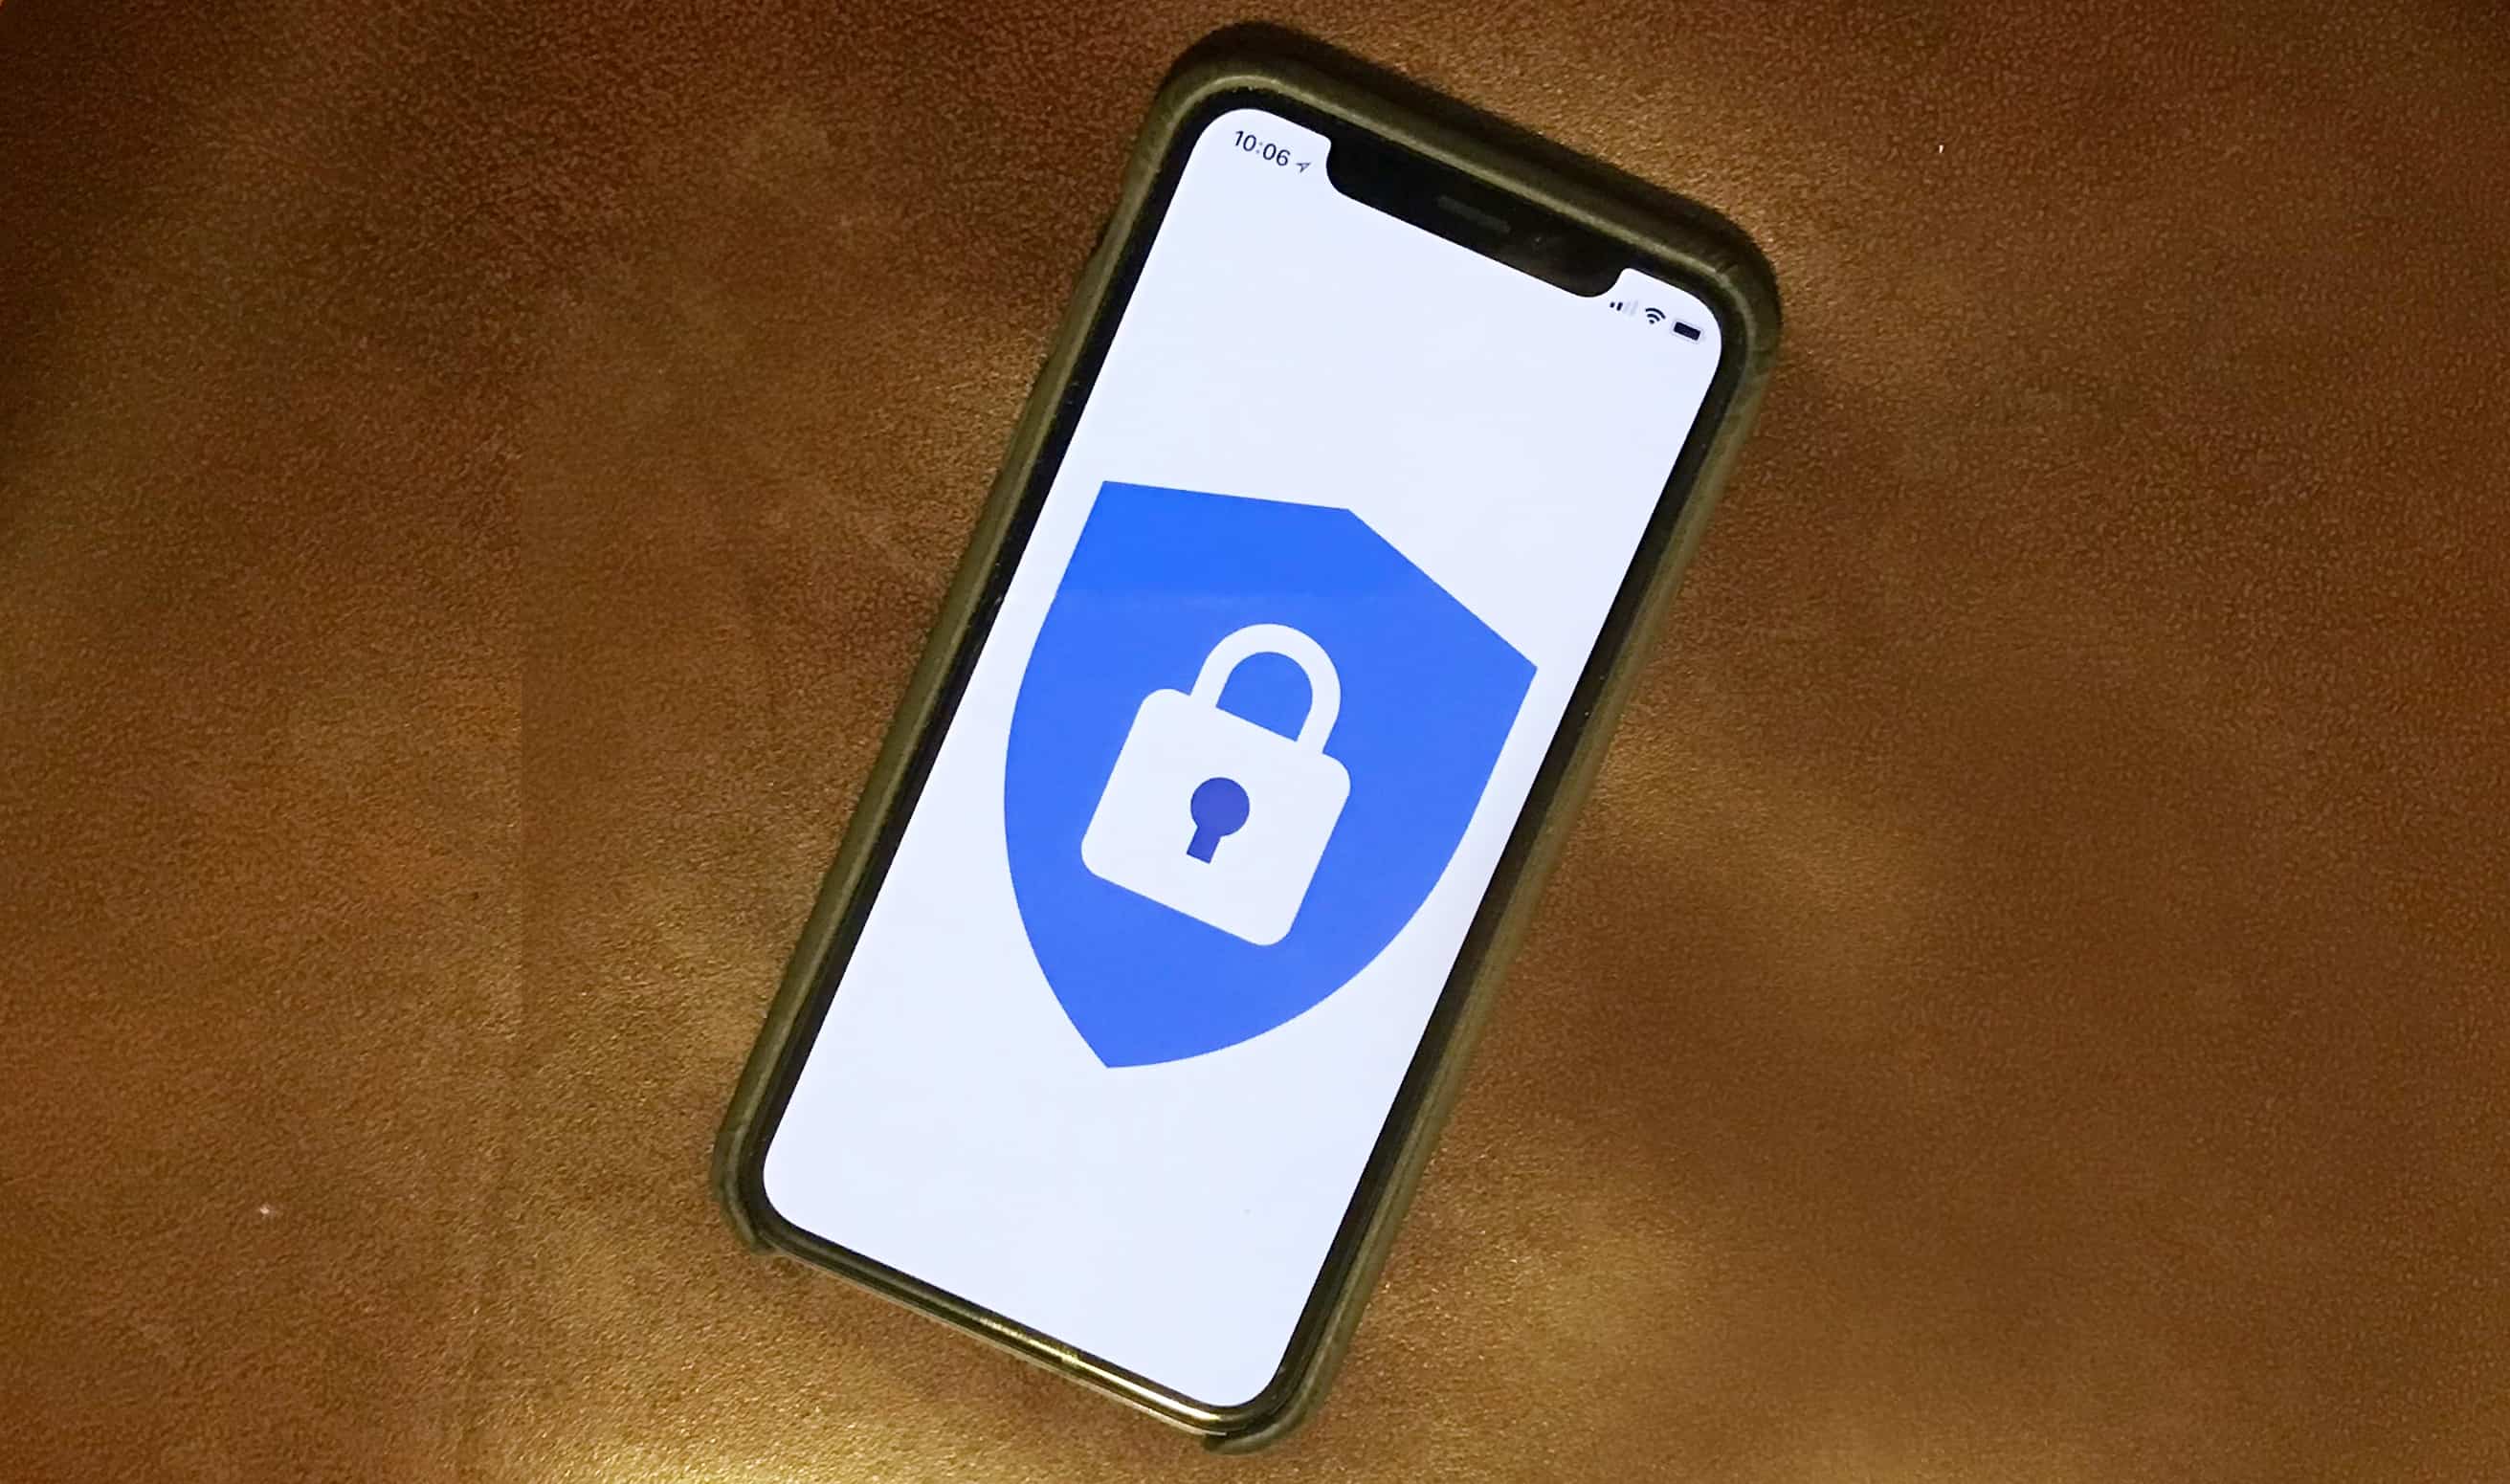 Google makes iPhones extremely secure | Cult of Mac